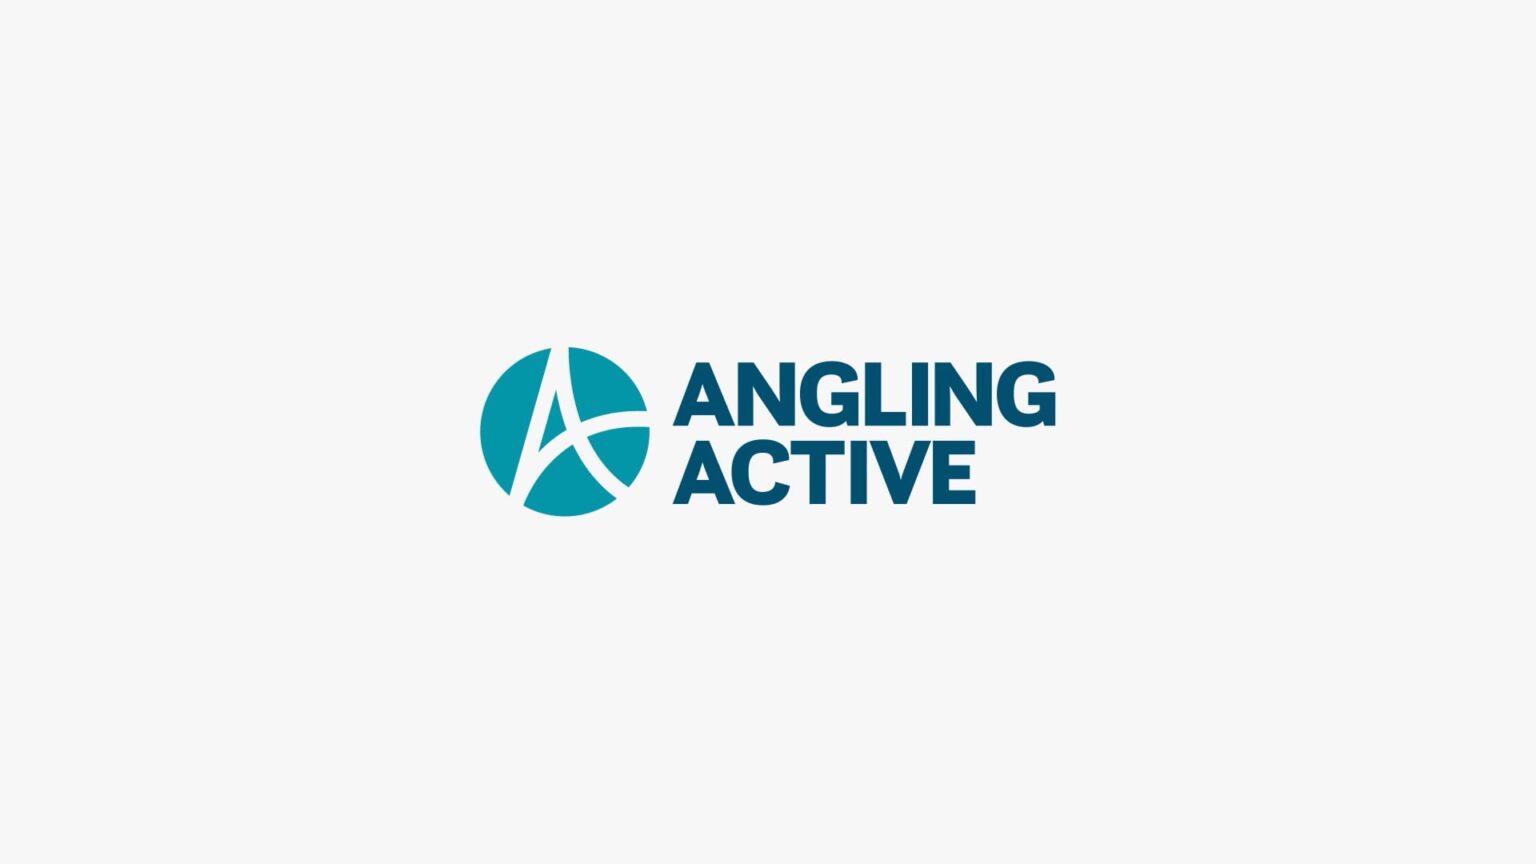 Angling Active logo in teal, on a grey background.